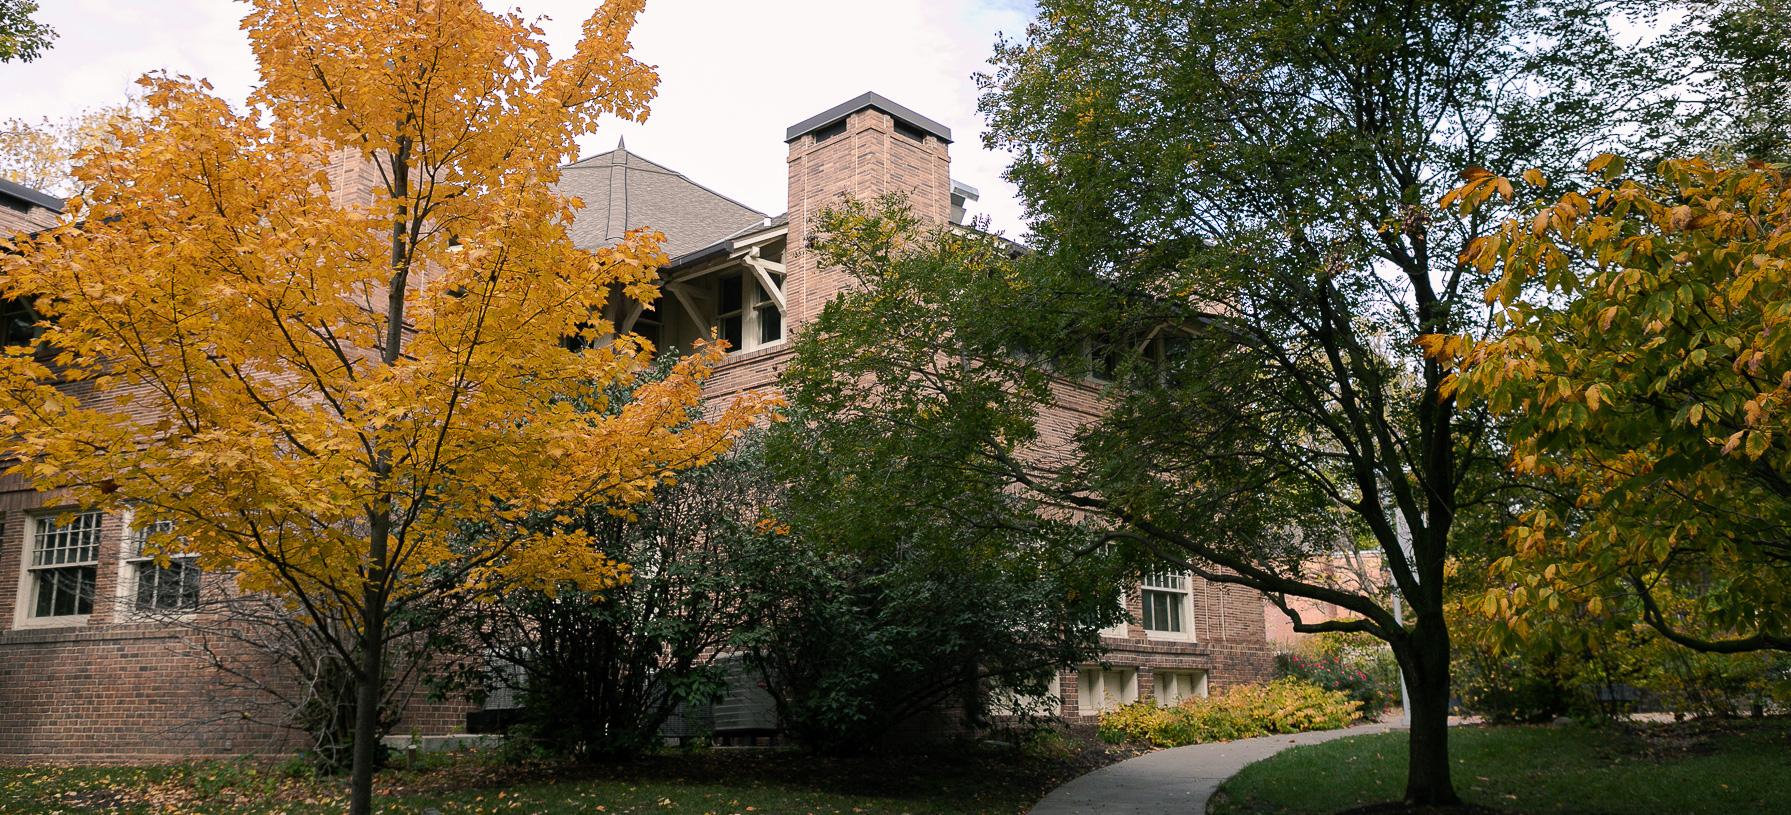 Building on Crete Campus in the Fall